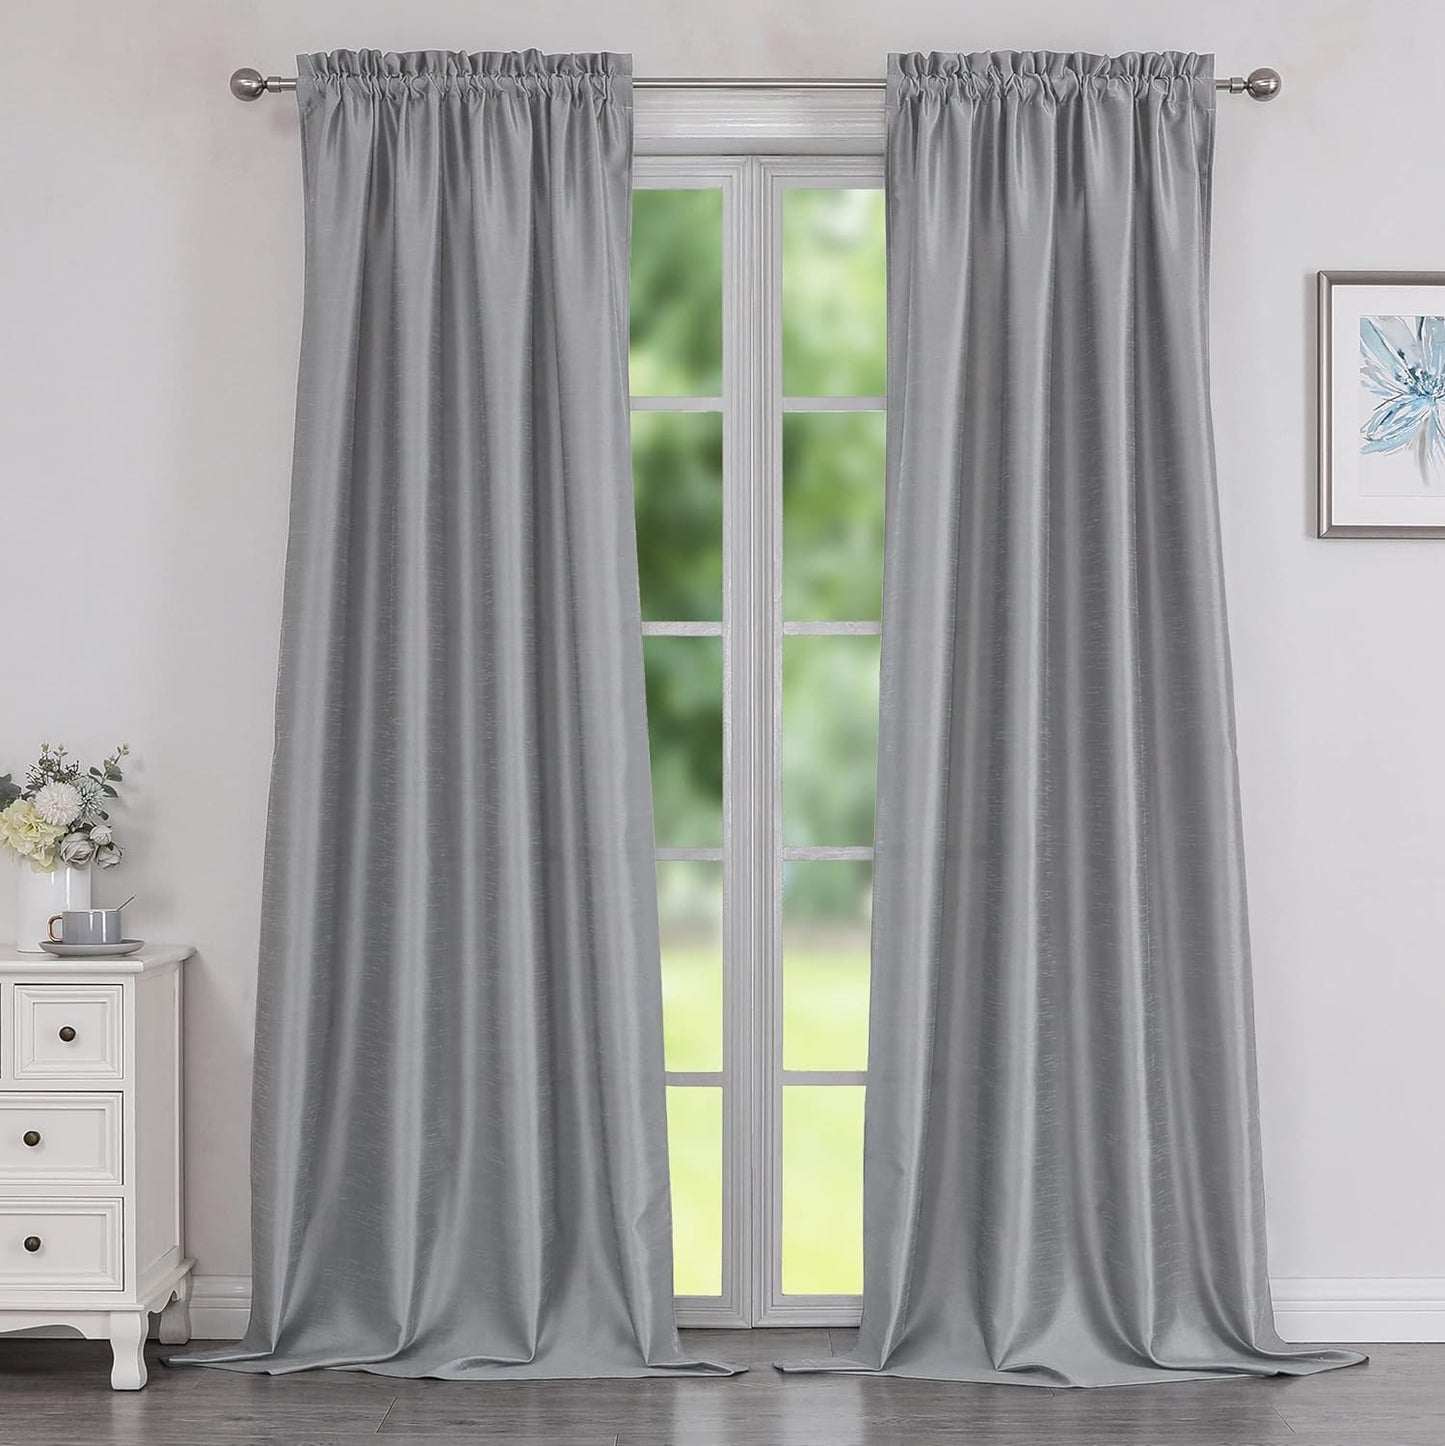 Chyhomenyc Uptown Sage Green Kitchen Curtains 45 Inch Length 2 Panels, Room Darkening Faux Silk Chic Fabric Short Window Curtains for Bedroom Living Room, Each 30Wx45L  Chyhomenyc Silver Gray 2X40"Wx96"L 